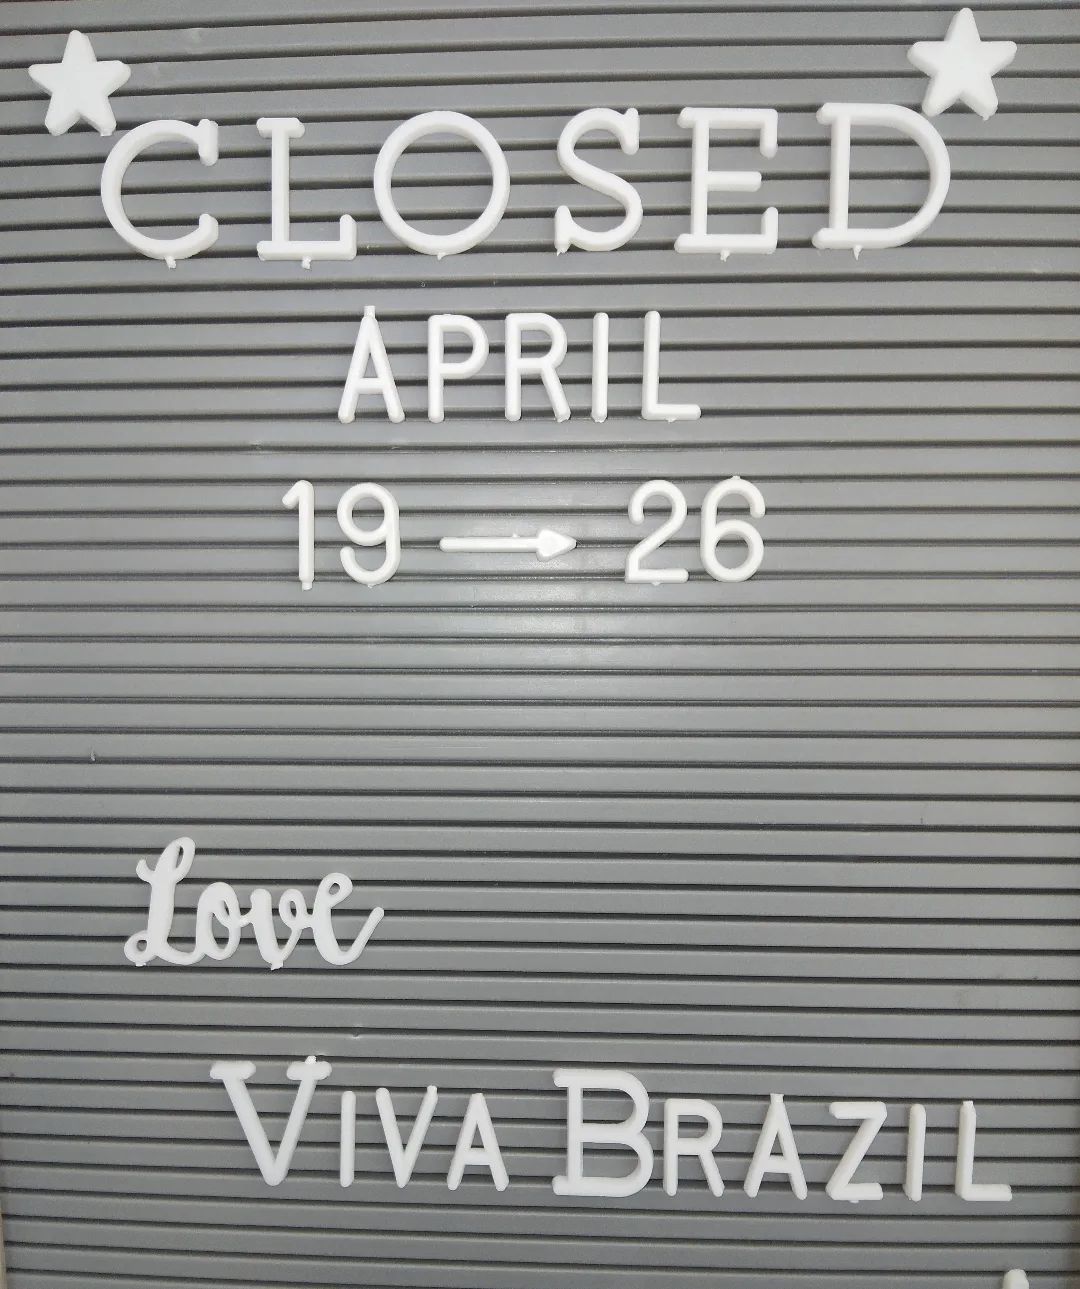 The spa will be closed April 19-26! We apologize if this interferes with anyone's schedule. #waxspecialist ##sandiego #lajolla #kearnymesa #skincare #planahead